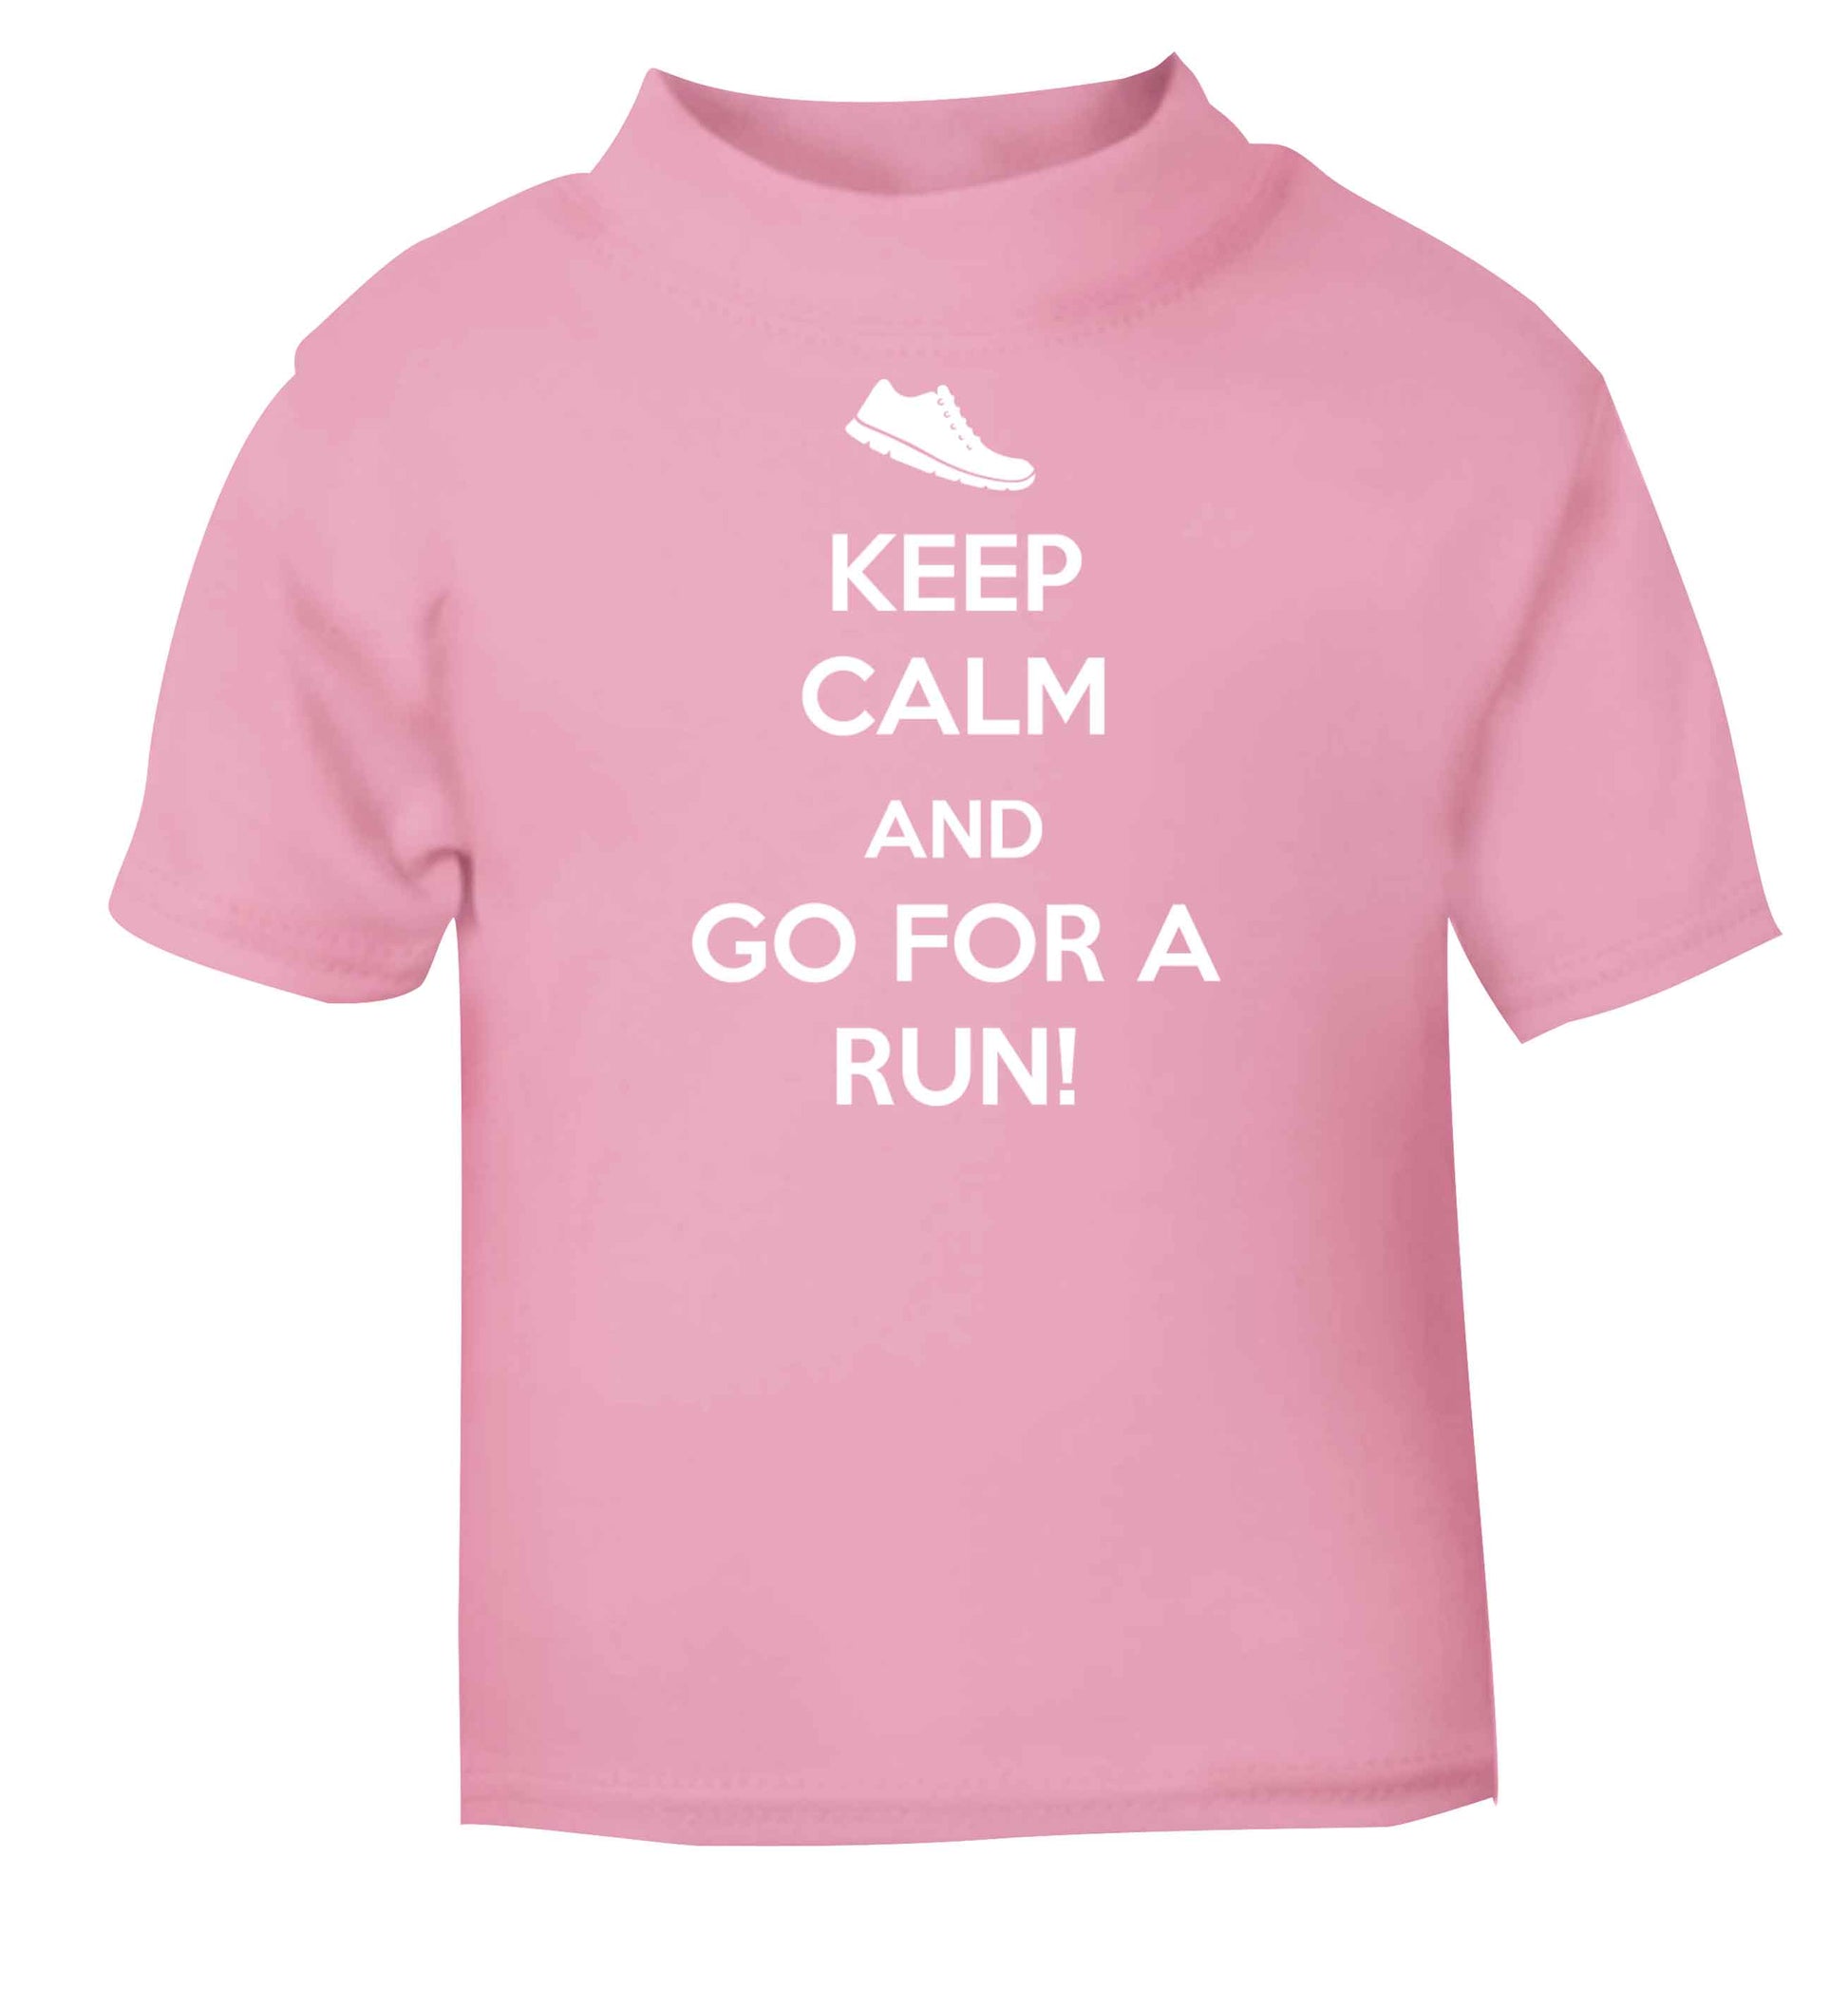 Keep calm and go for a run light pink baby toddler Tshirt 2 Years